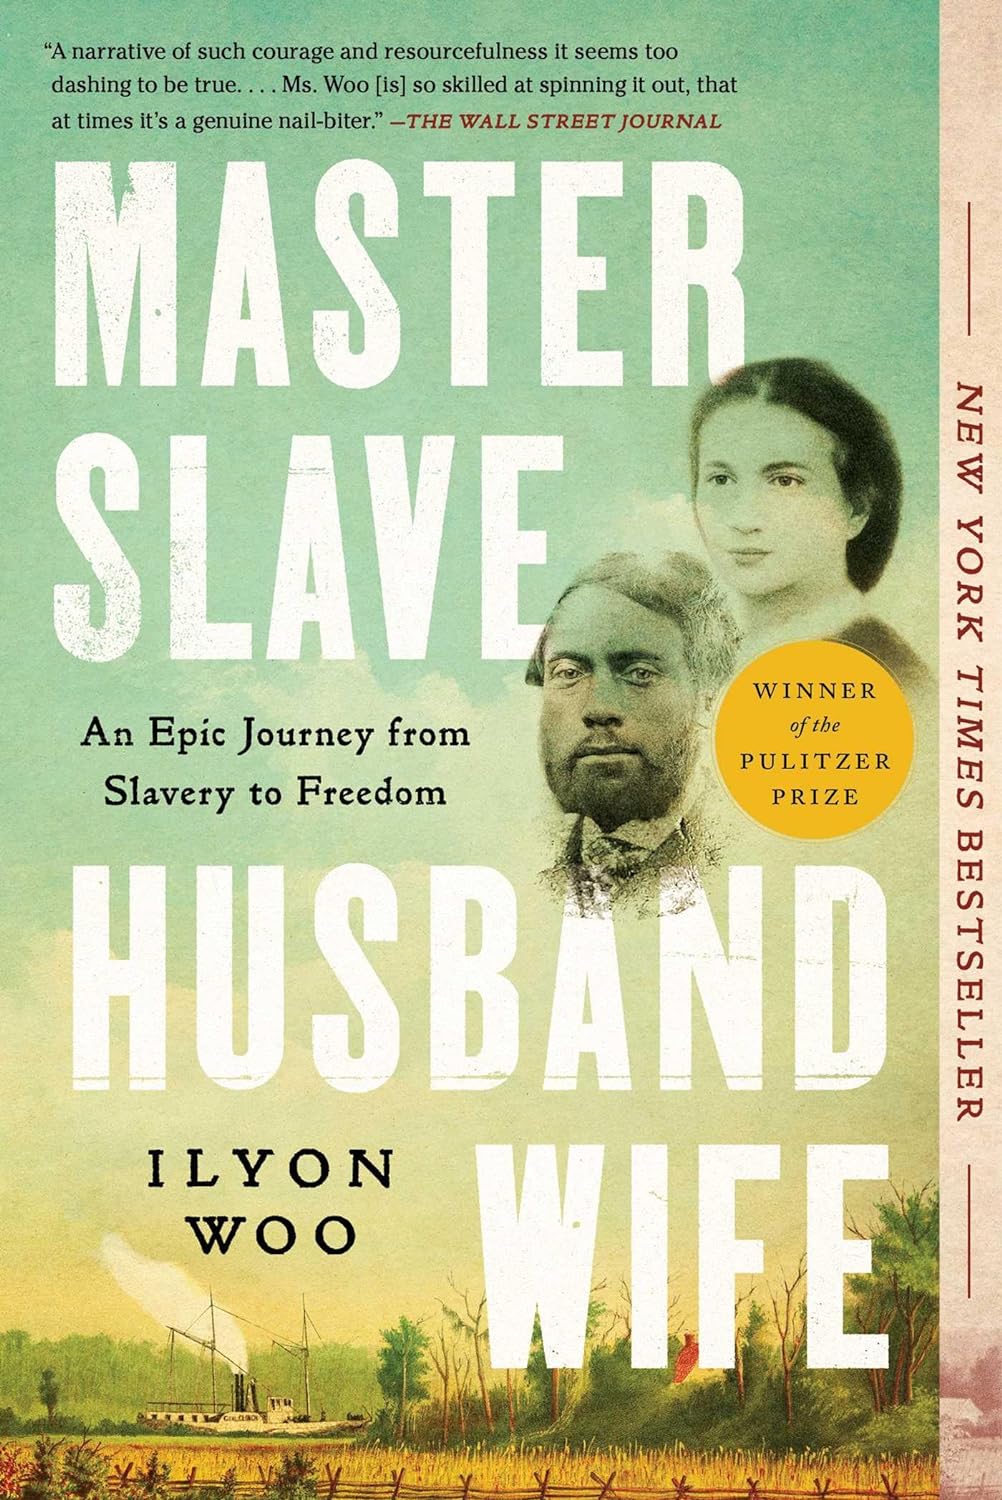 Master slave, husband wife : an epic journey from slavery to freedom